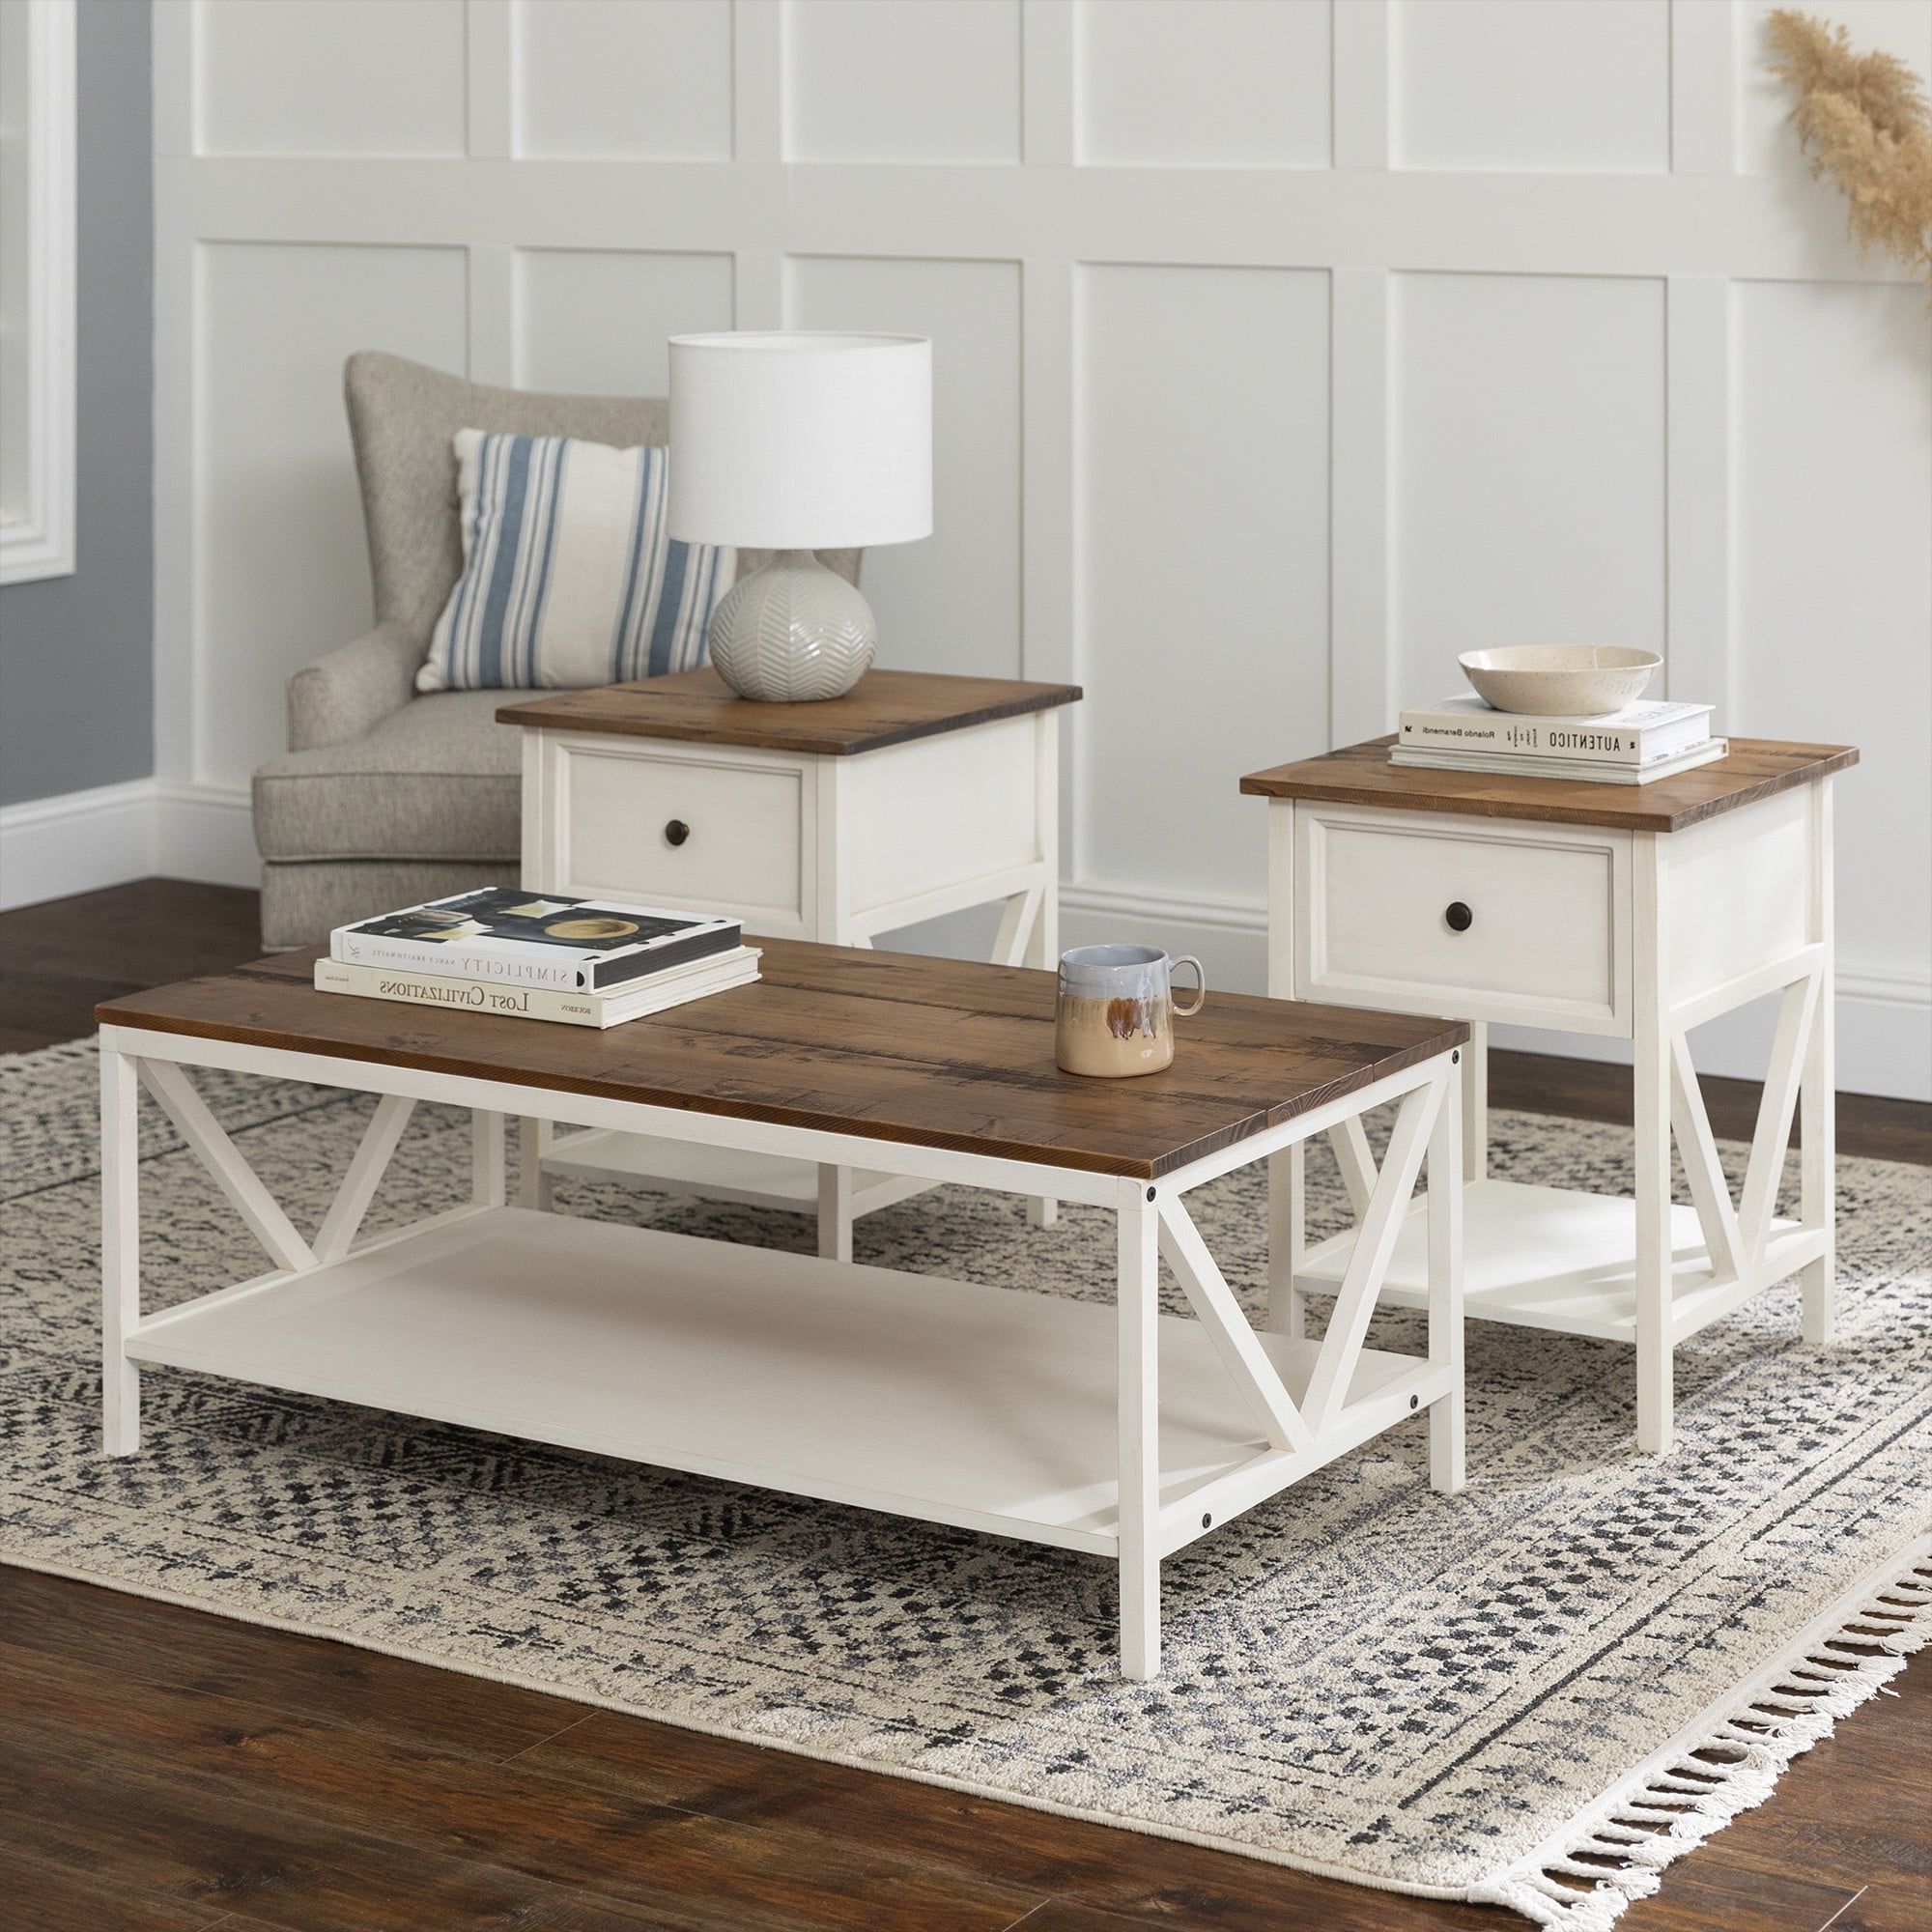 Modern Farmhouse Coffee Table Sets Intended For Most Popular Modern Farmhouse Accent Table Set, Distressed White – Walmart (View 5 of 15)